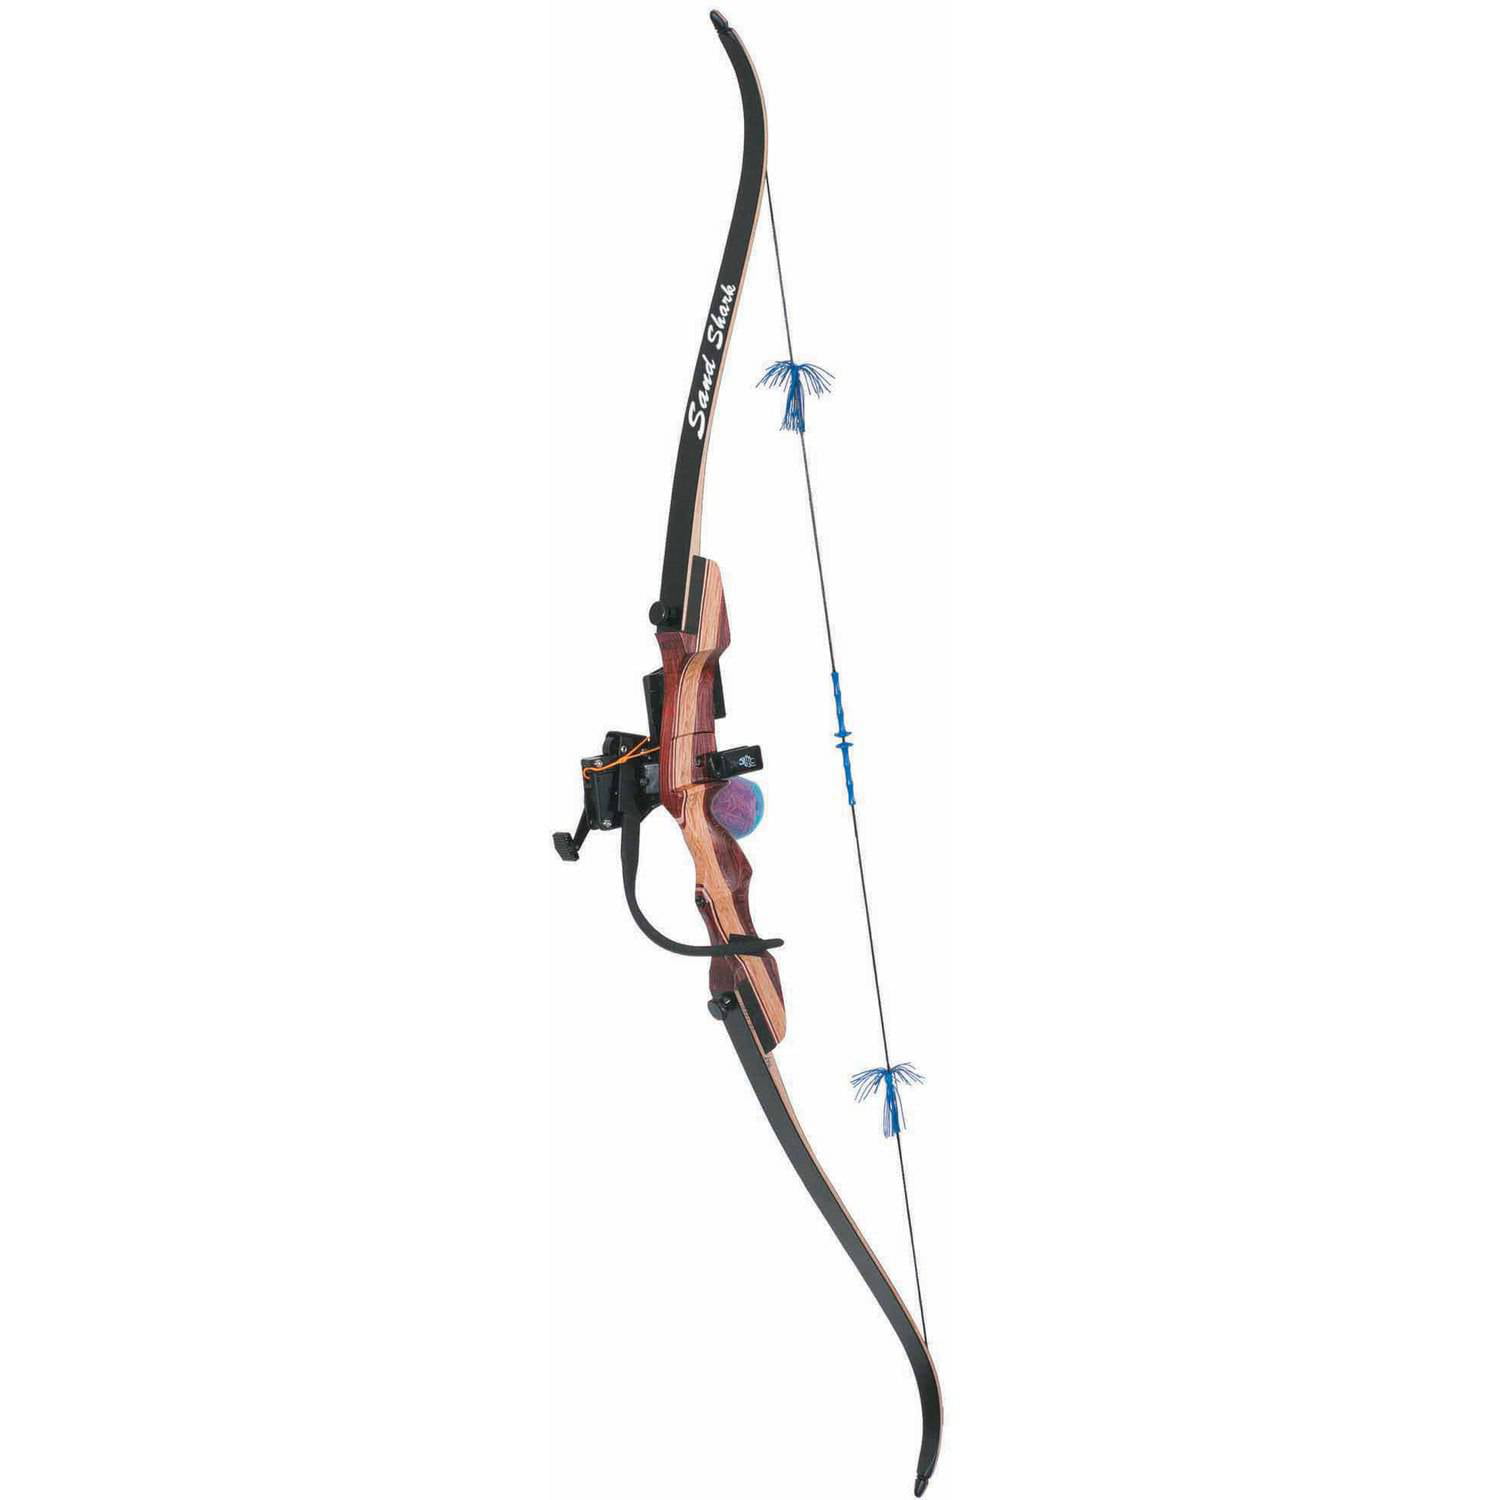 Sand Shark Recurve Bowfishing Bow with Retriever Package by Fin-Finder 